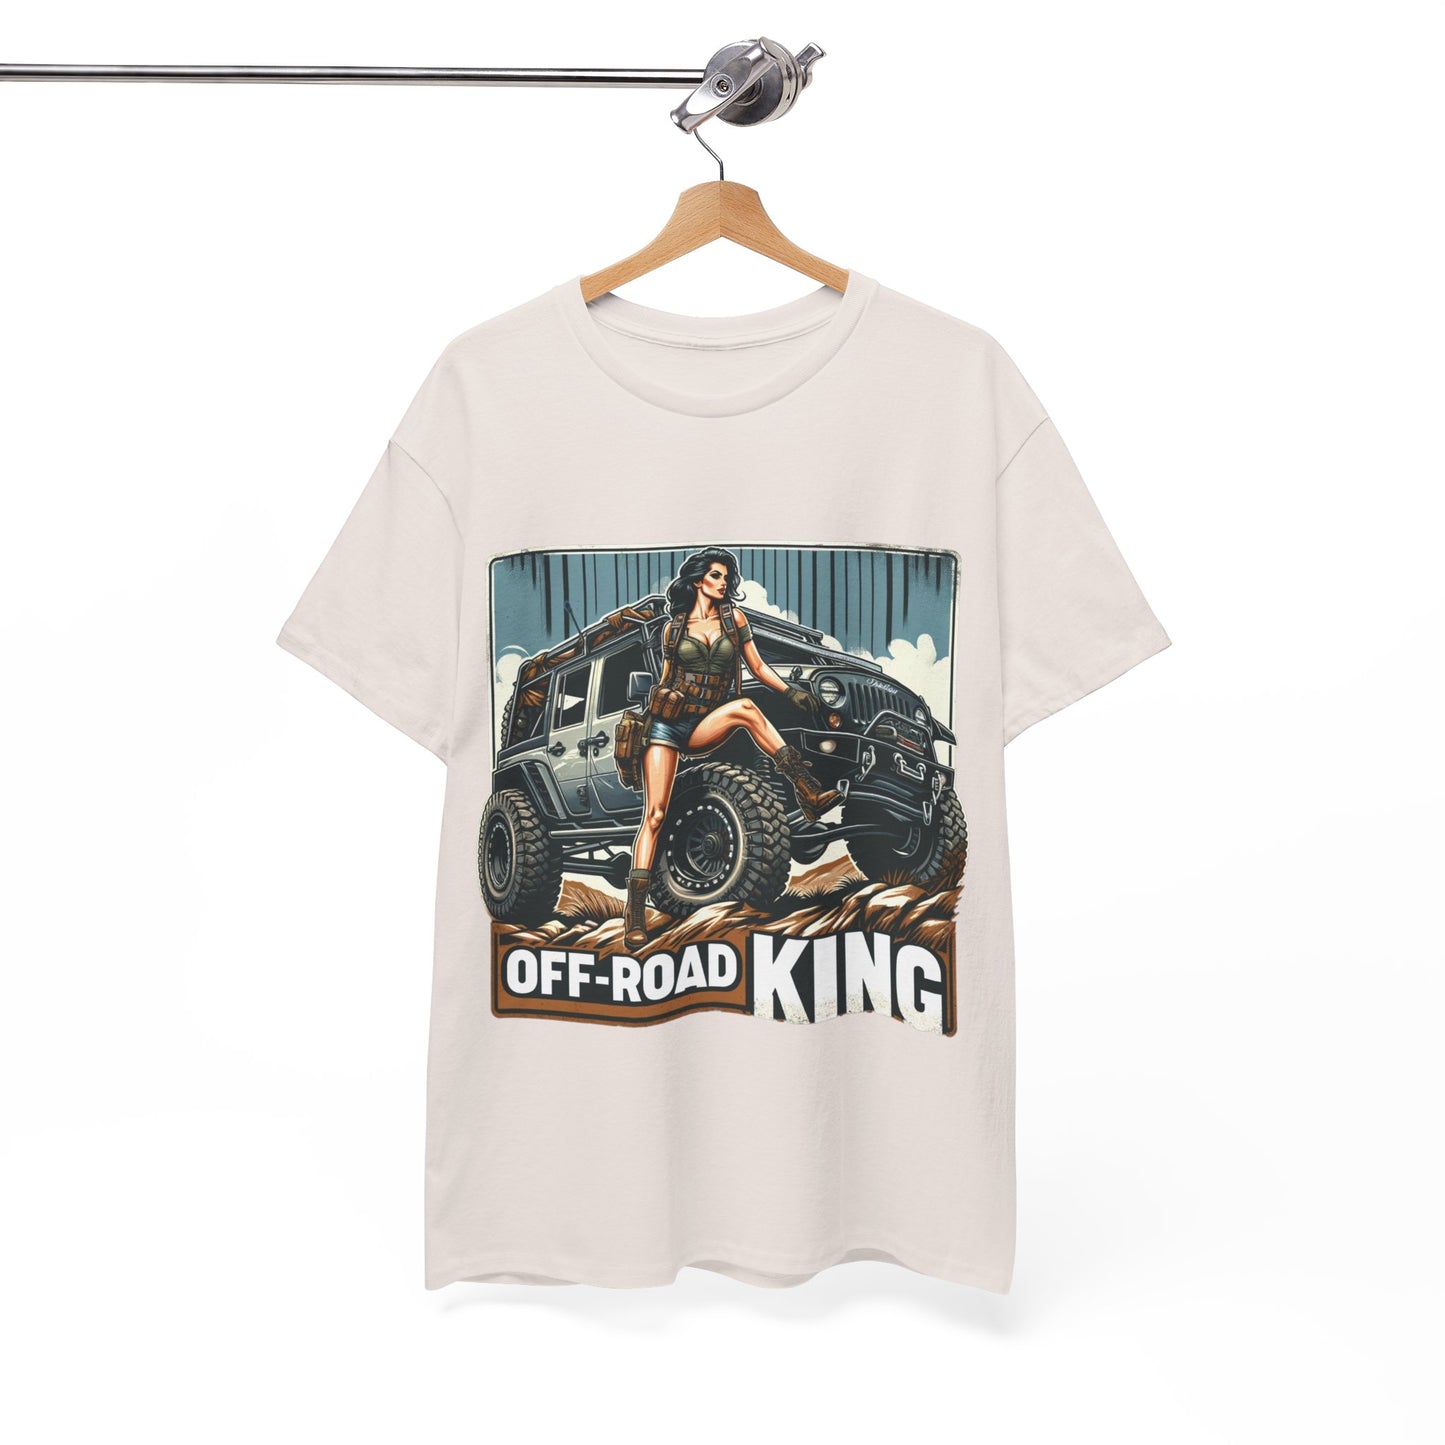 Off-Road King Adventure Tee - Off-Road Vehicle Shirt for Trail Blazers